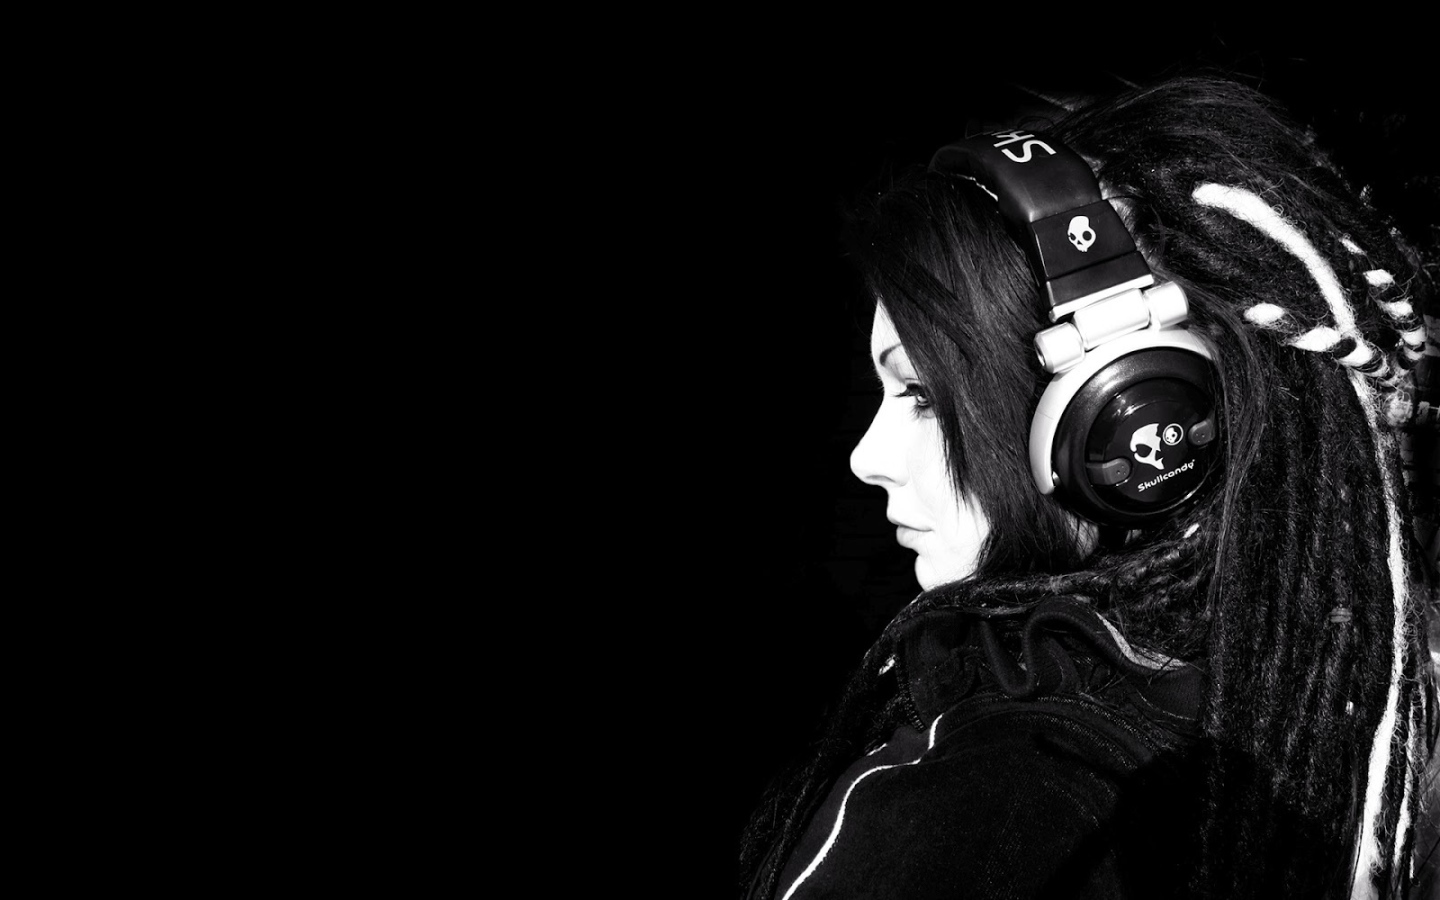 Girl in headphones on a black background